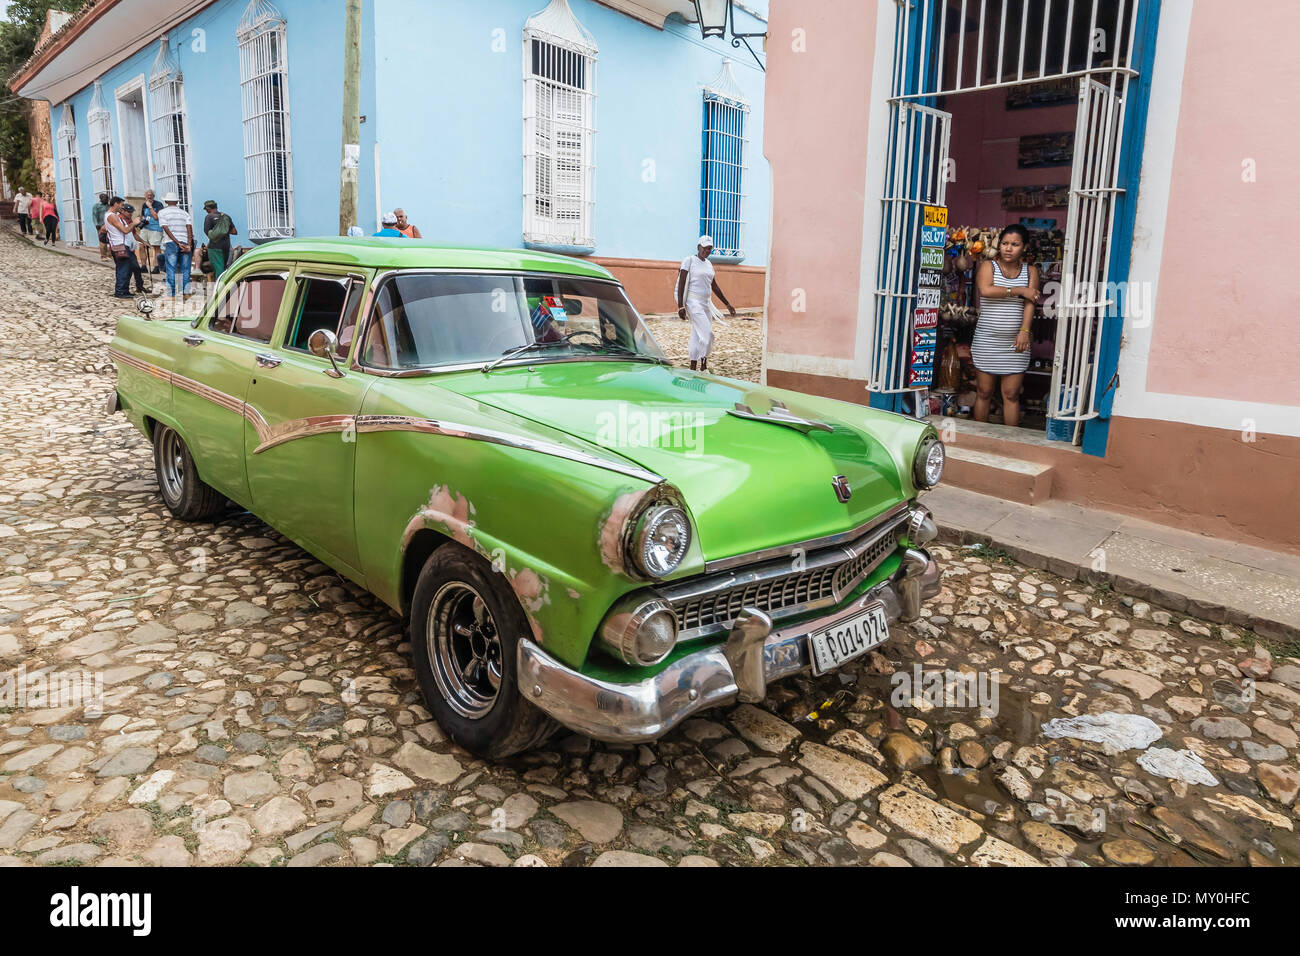 A vintage 1950's American car working as a taxi in the UNESCO World Heritage town of Trinidad, Cuba. Stock Photo